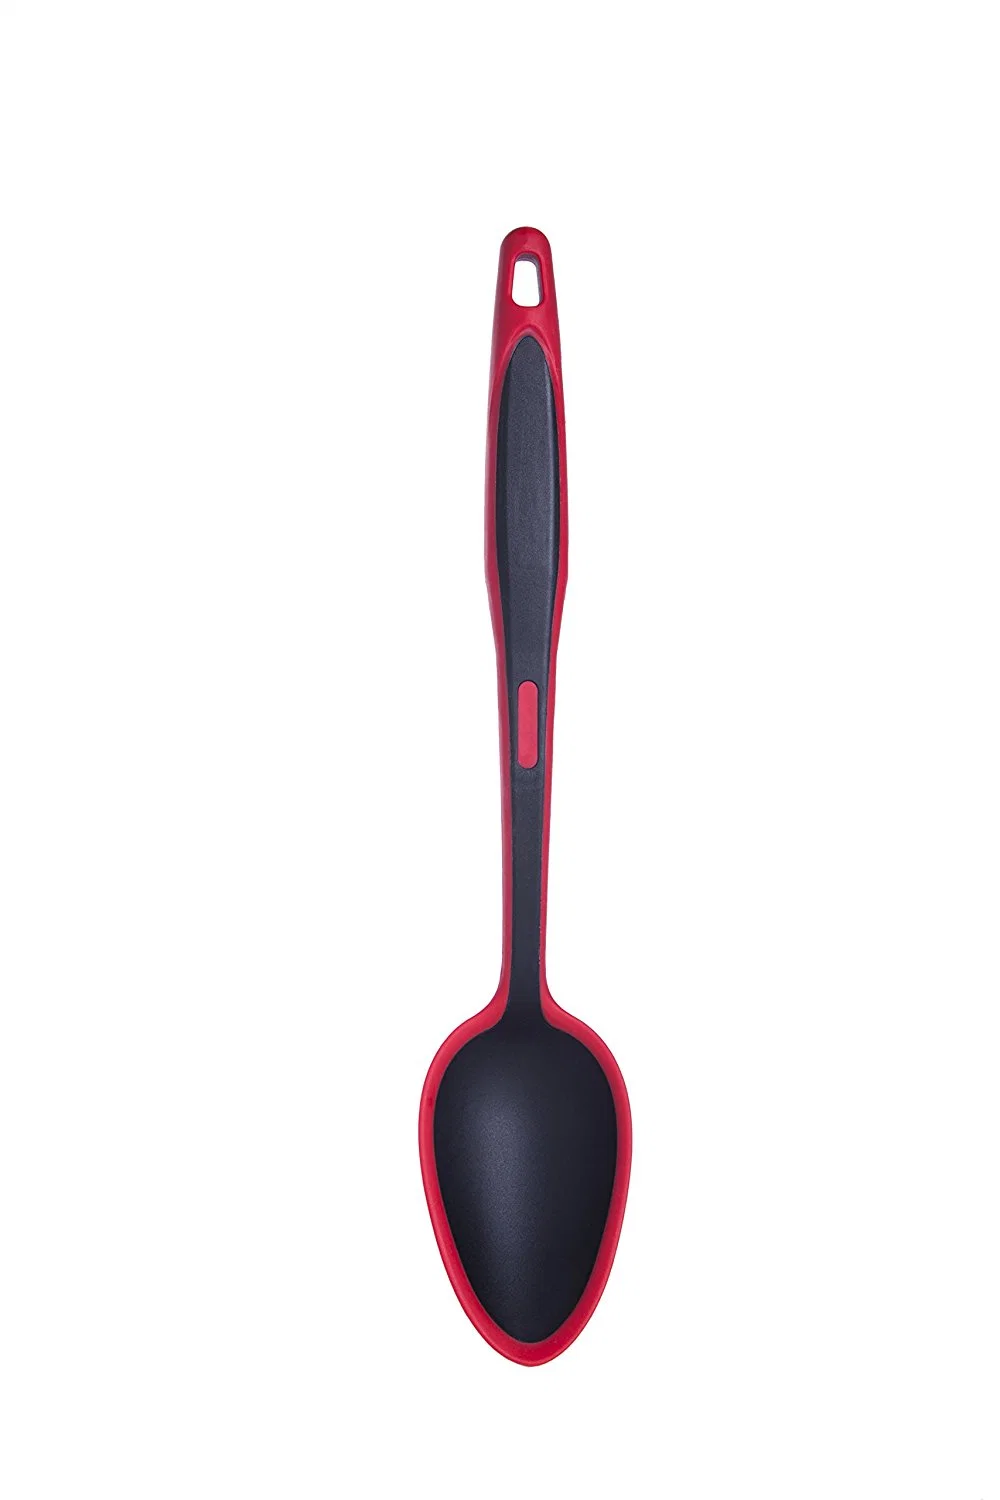 Flexibkle Silicone and Rigid PA Cook Utensil Kitchen Serving Spoon Kitchen Tool